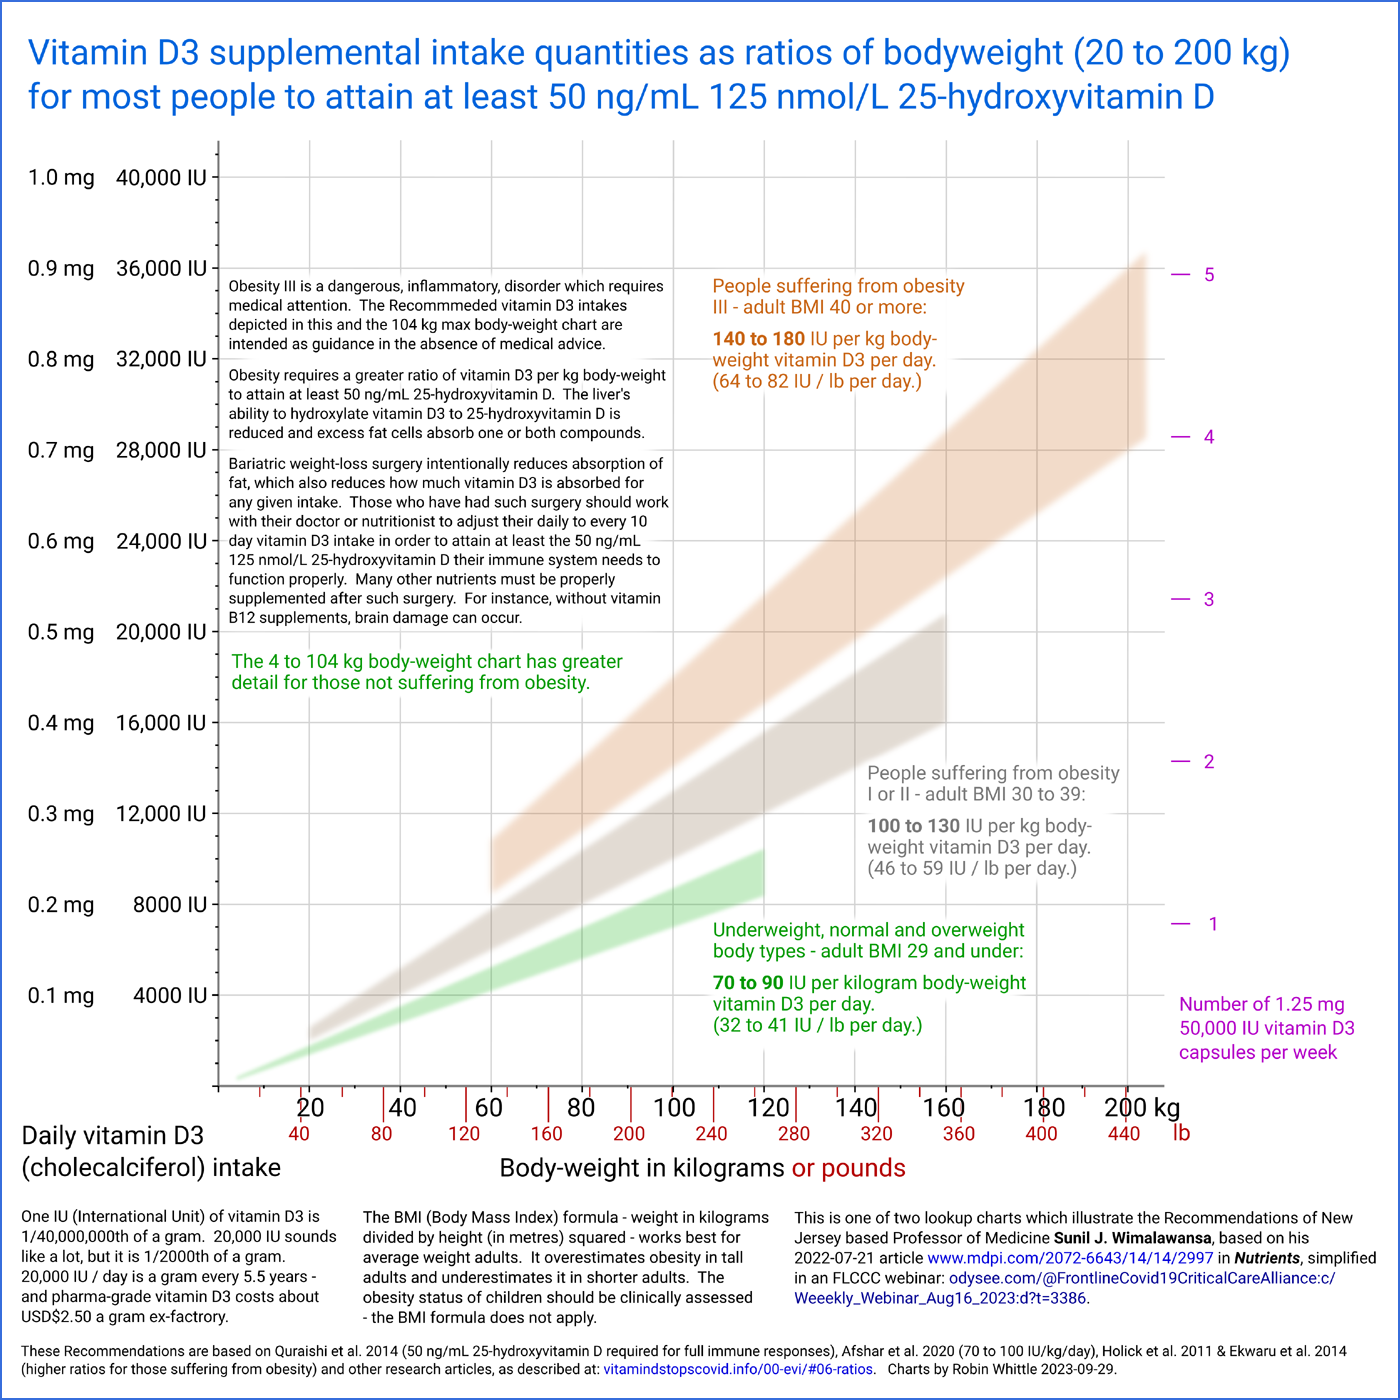 Graph of how much vitamin D3 to take, as ranges of ratios of body weight.